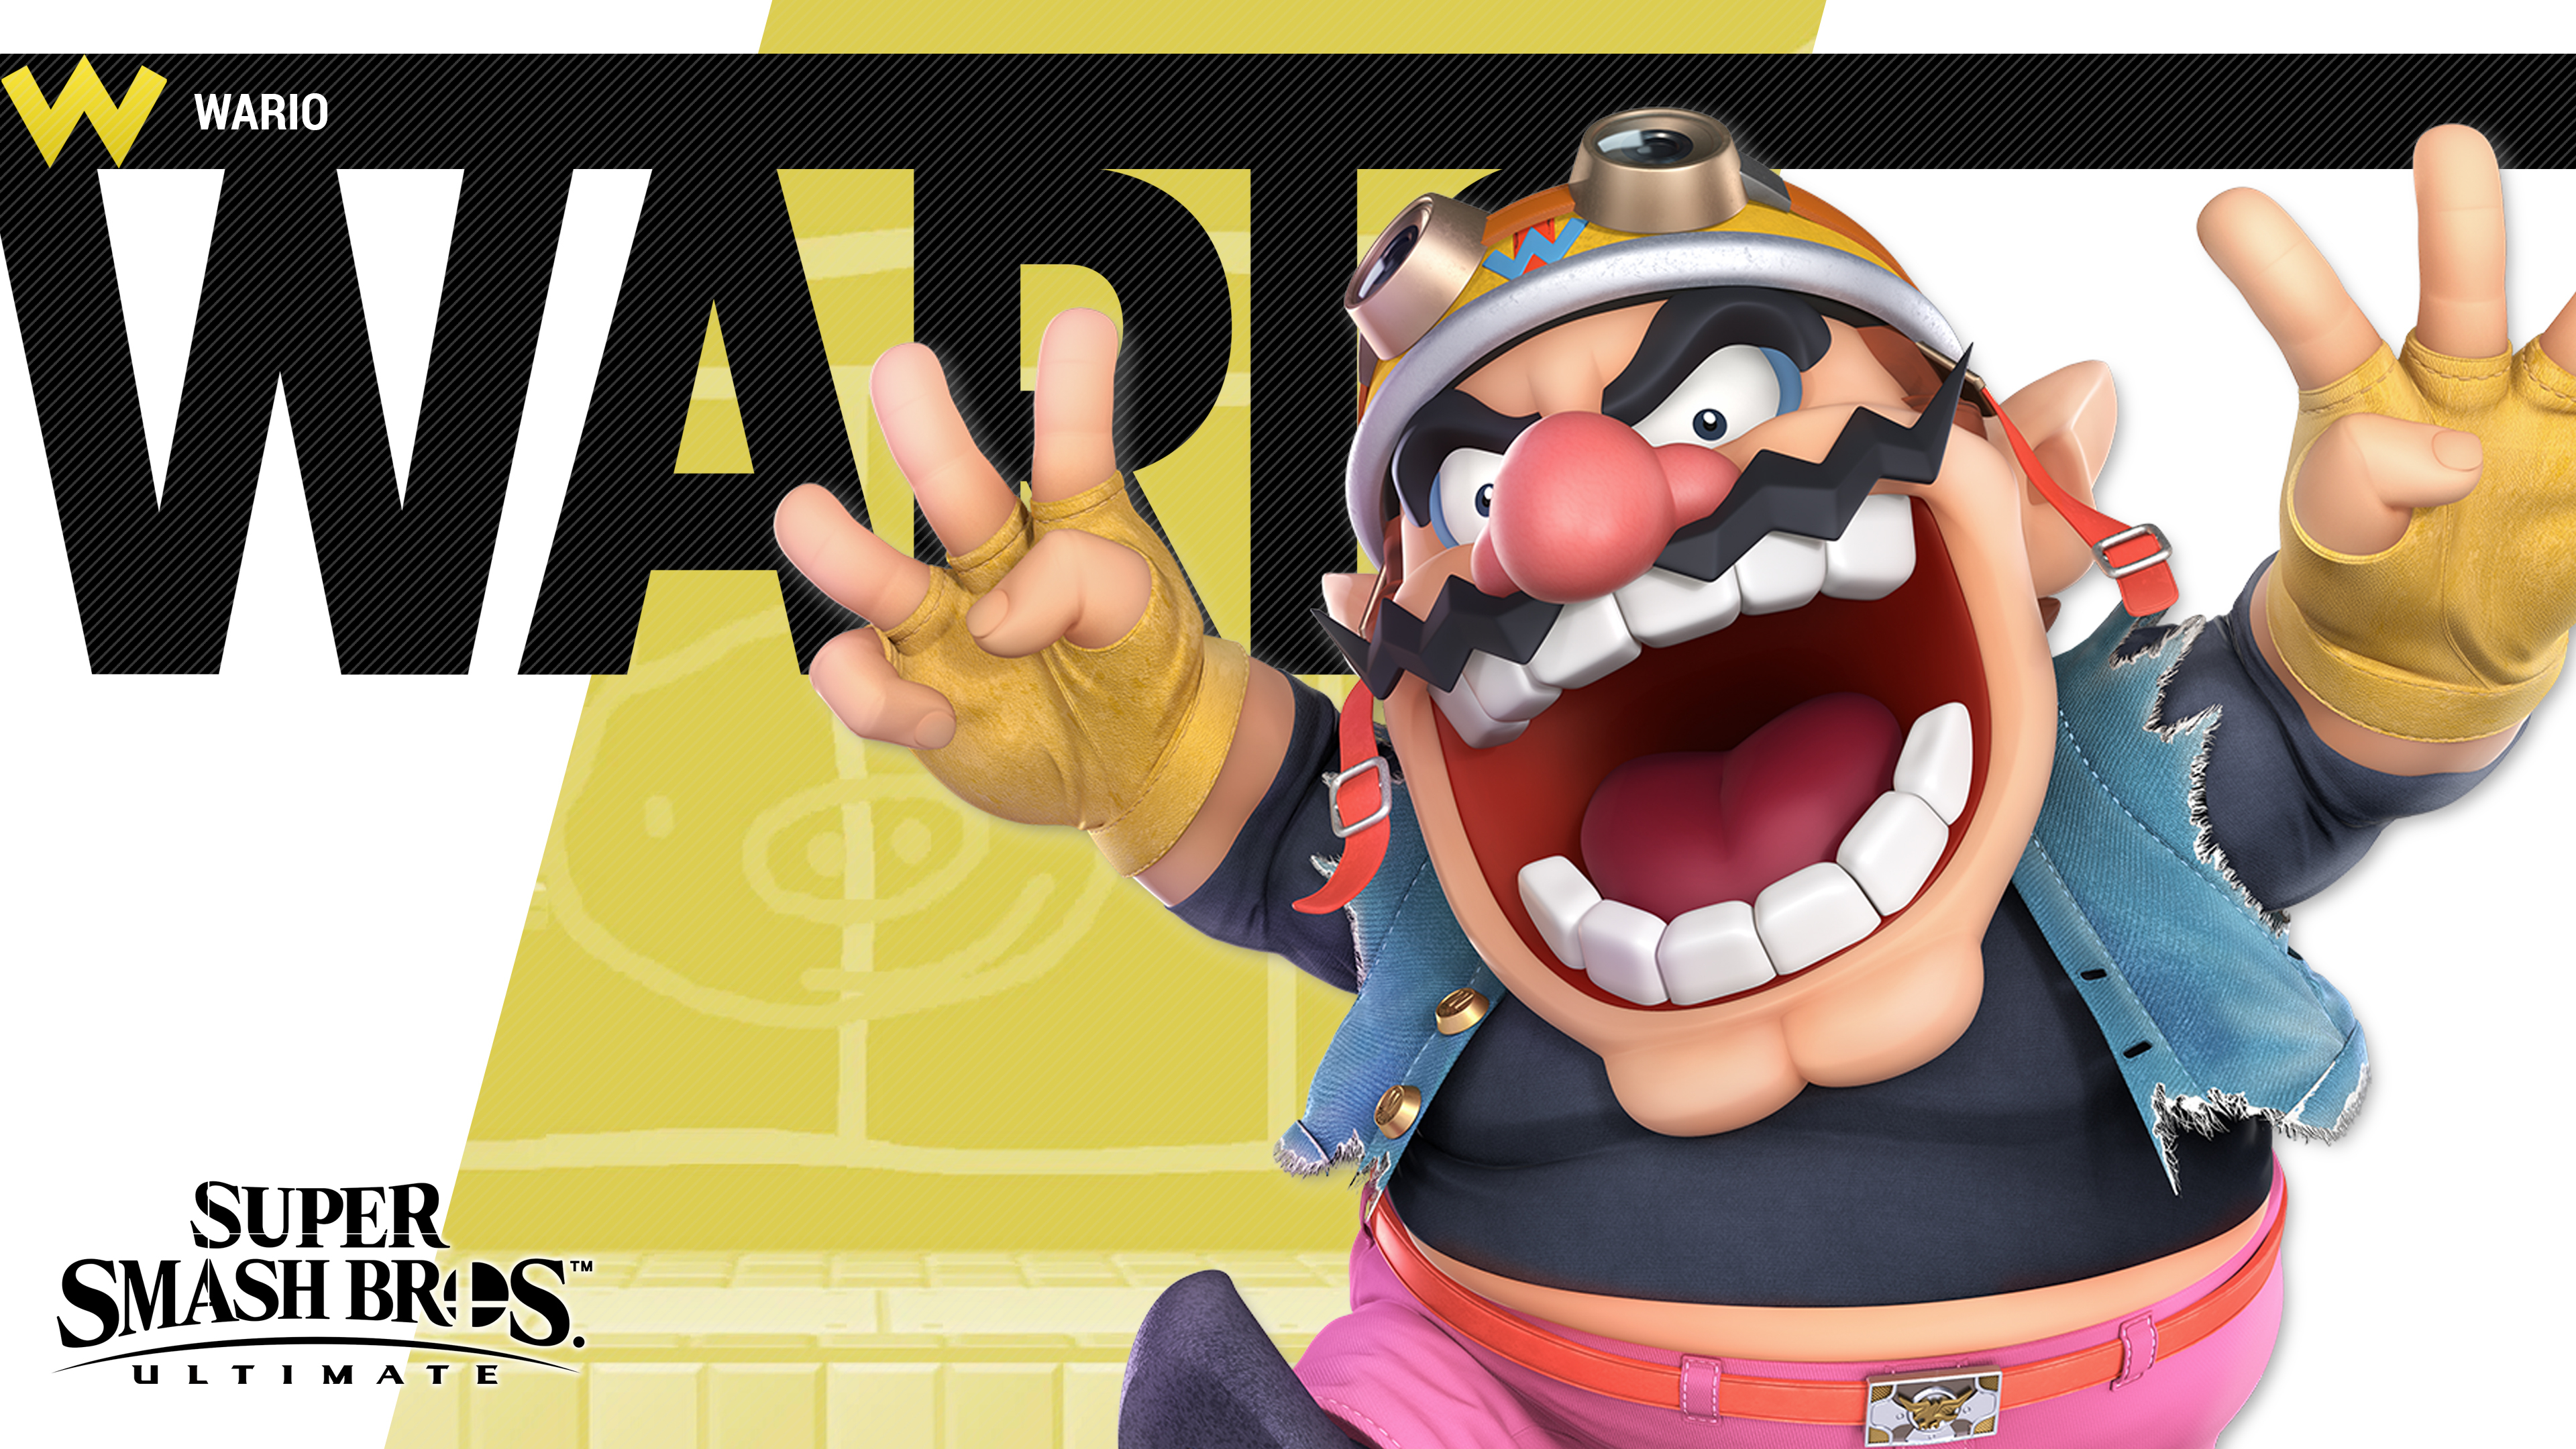 3840x2160 Super Smash Bros Wario Wallpapers Cat with Monocle